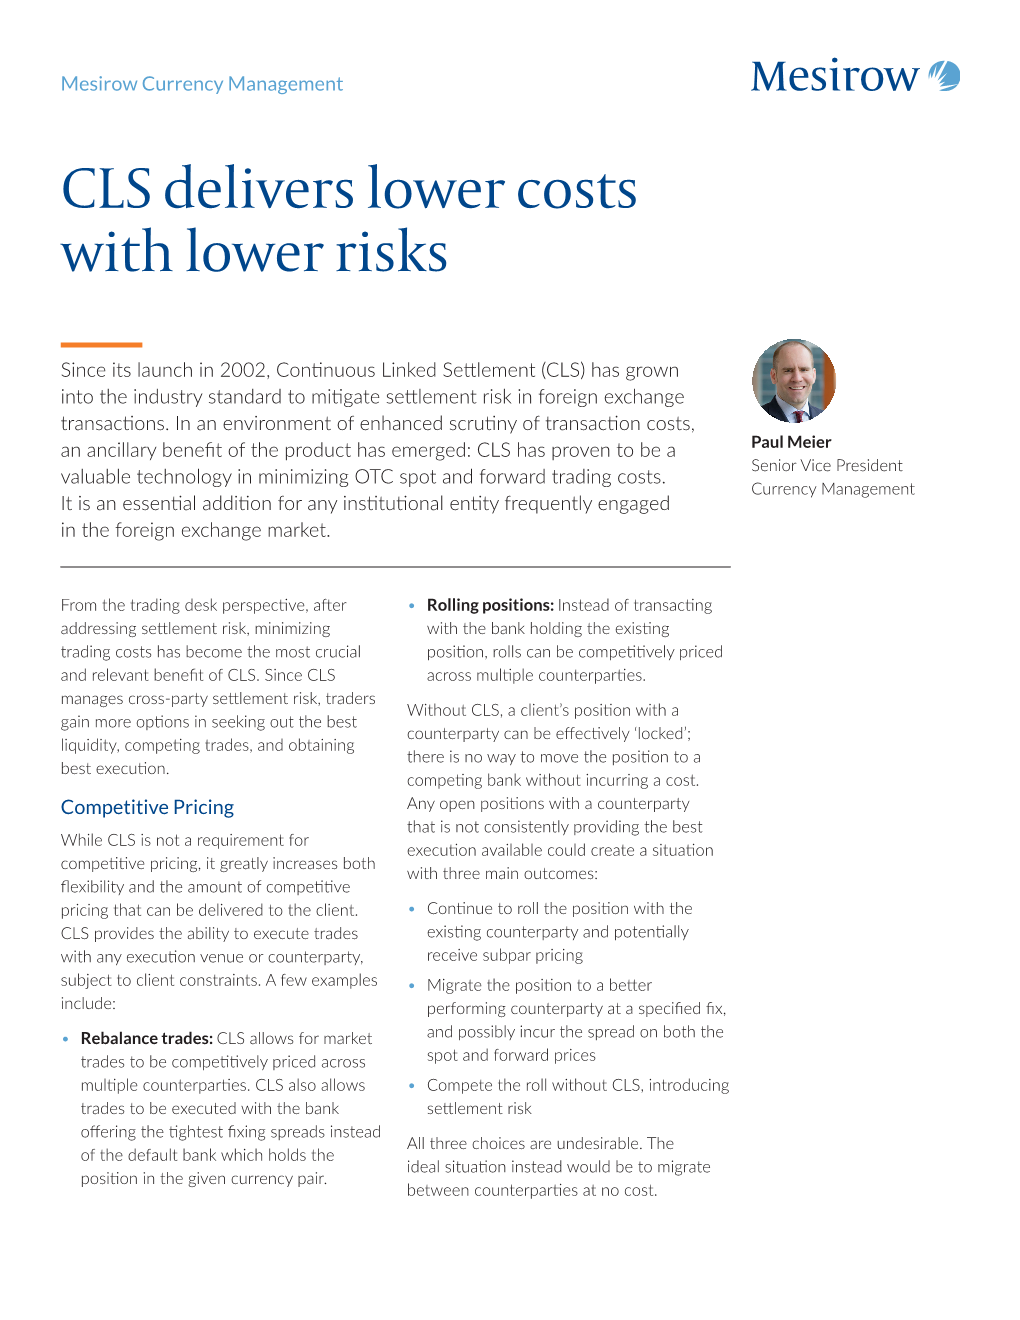 CLS Delivers Lower Costs with Lower Risks